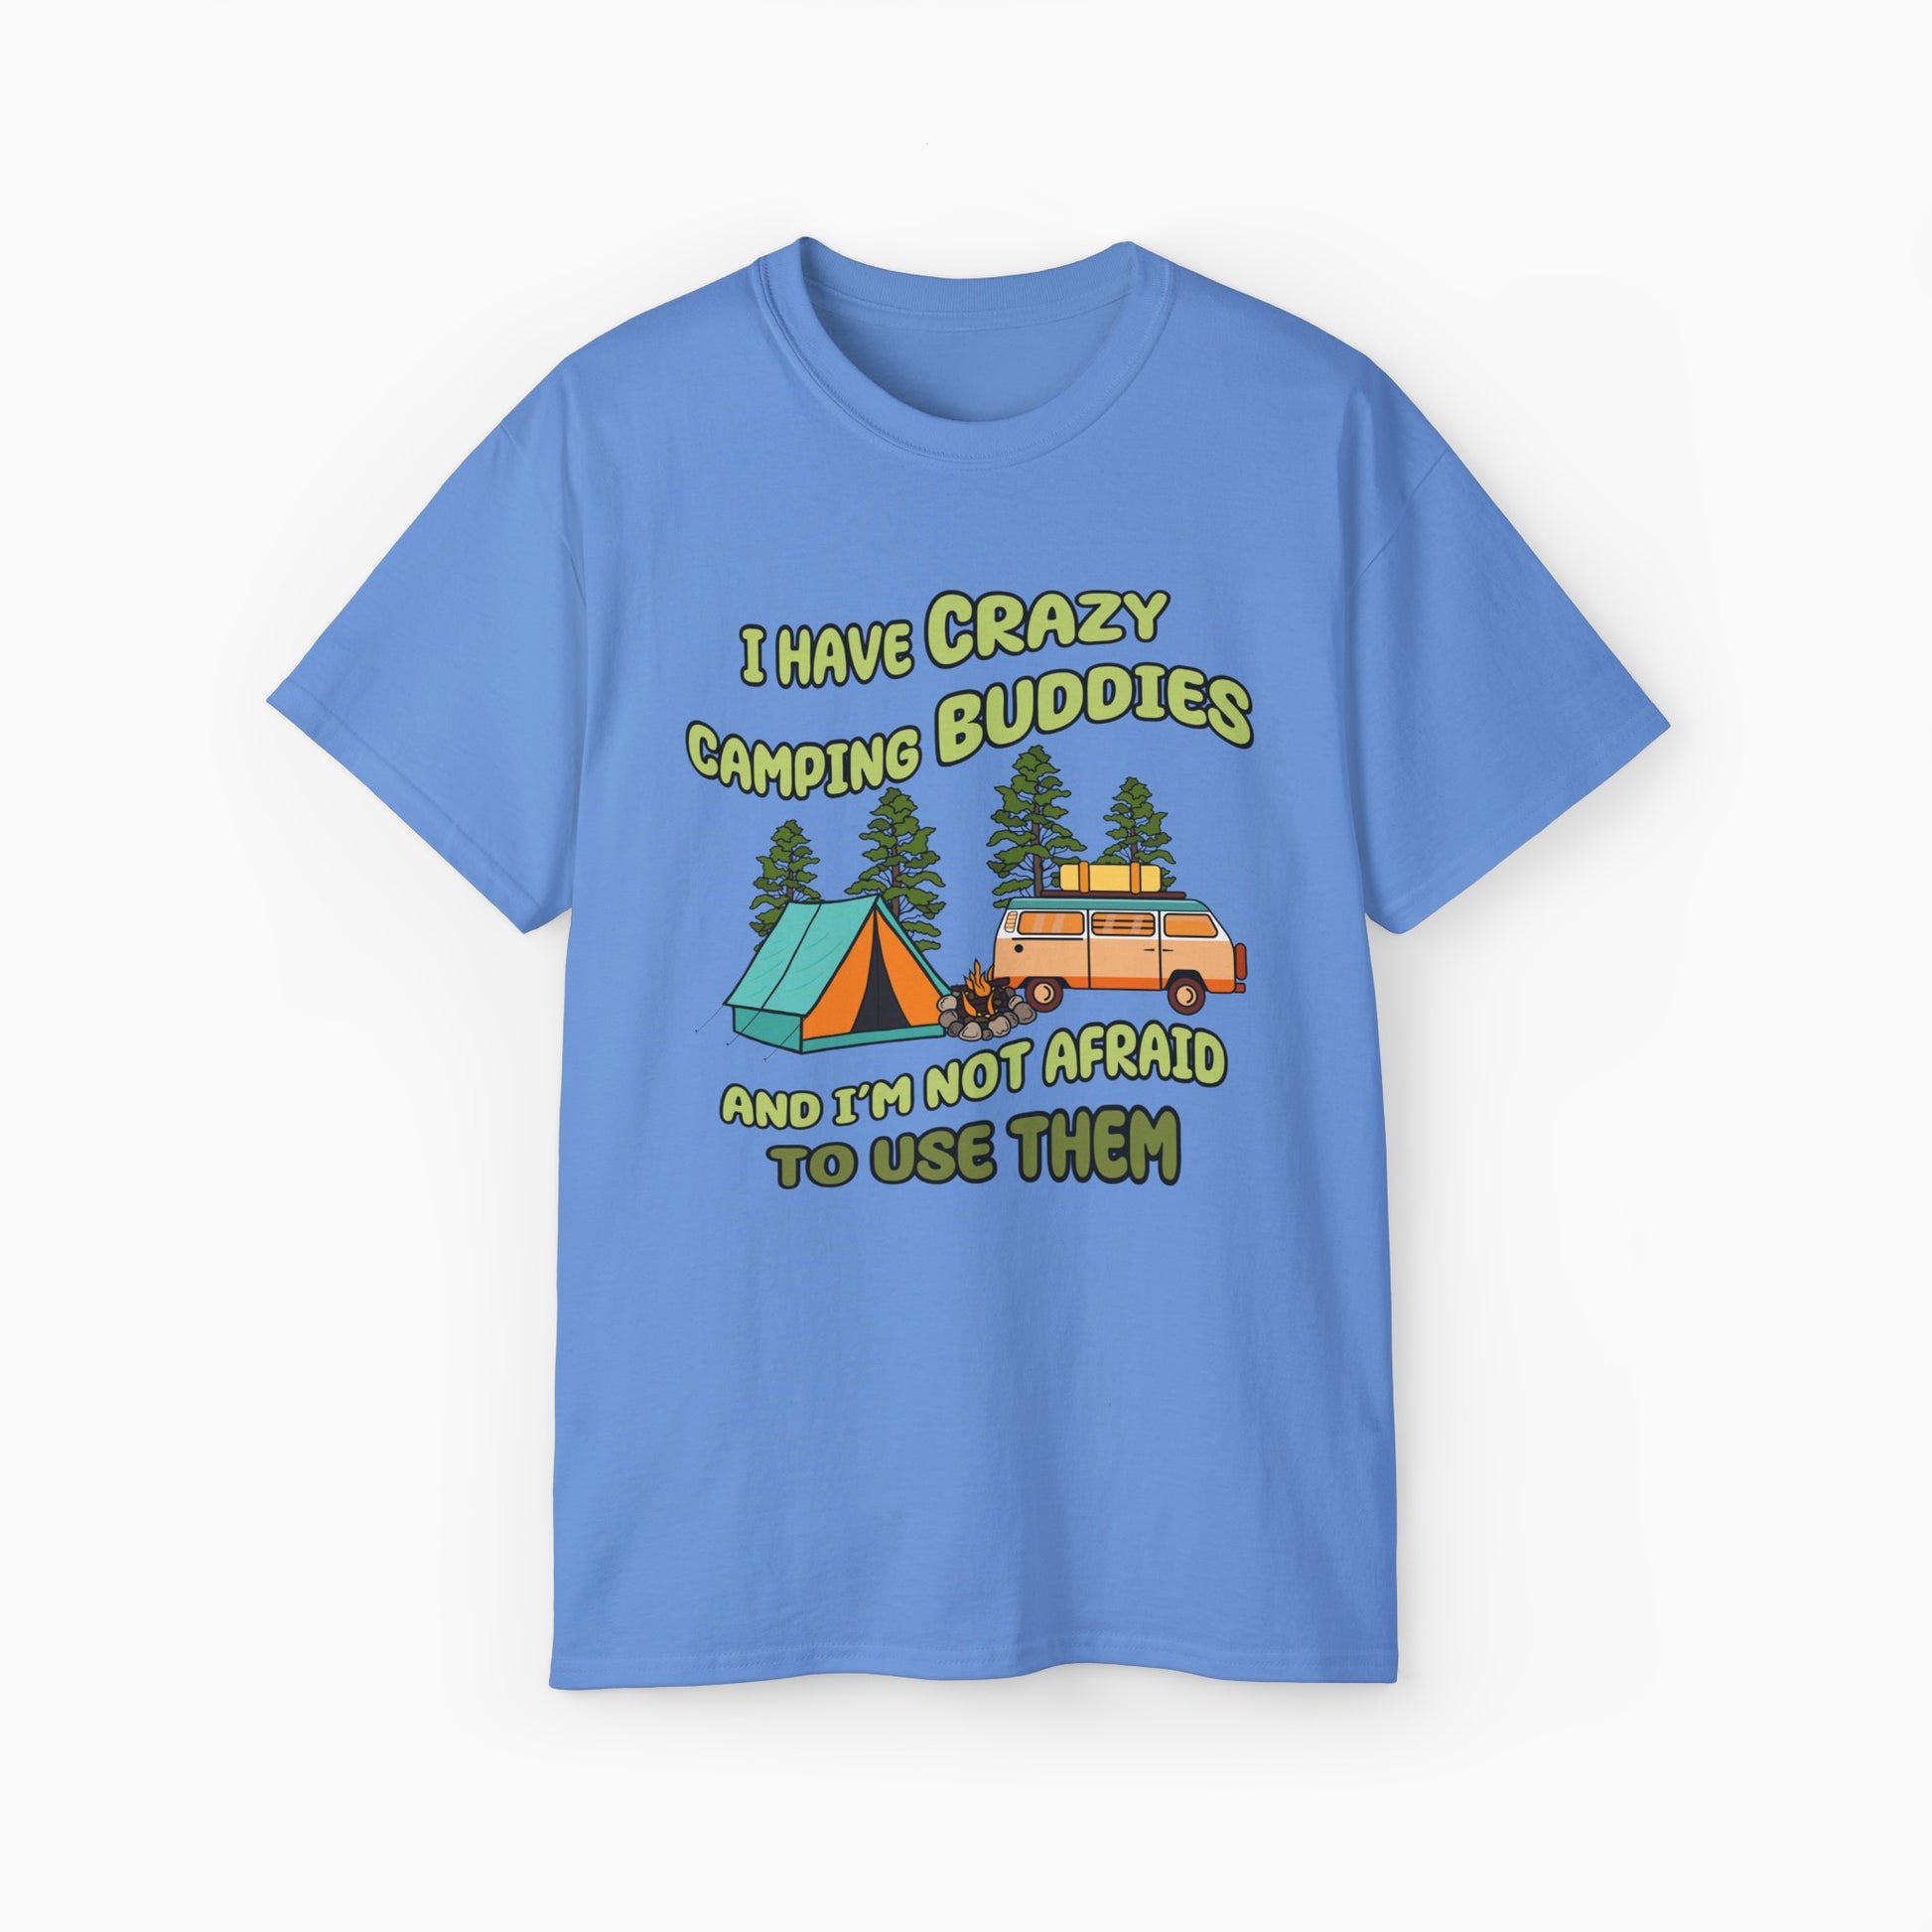 Blue t-shirt with the text 'I have crazy camping buddies and I am not afraid to use them,' featuring a camping van, campfire, trees, and a tent."